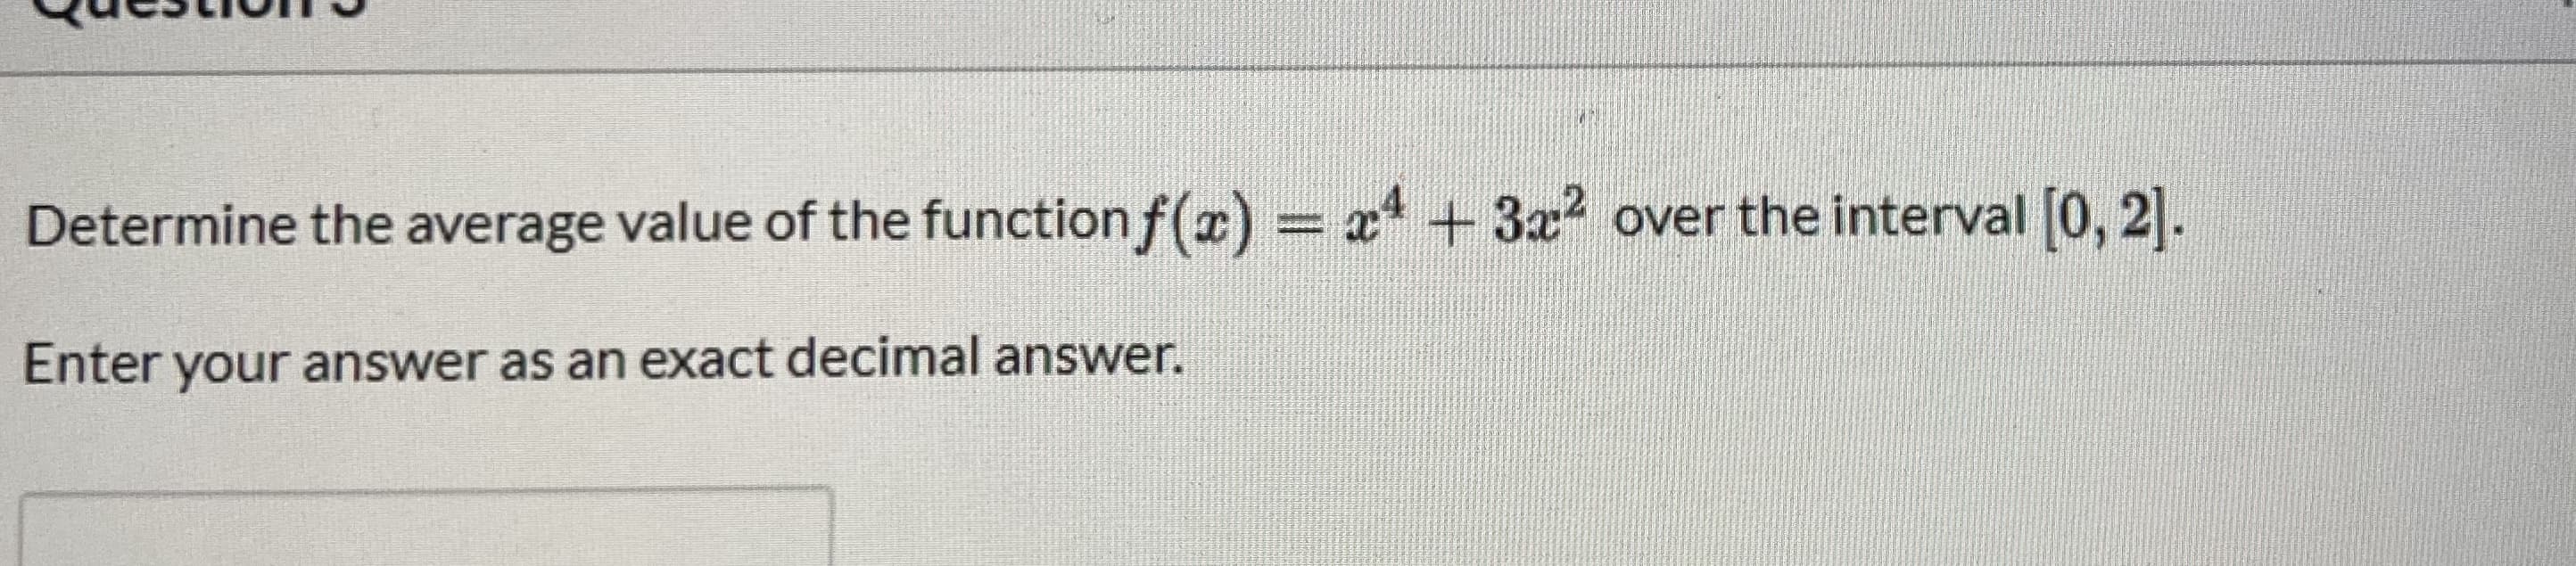 Determine the average value of the function f(r) = x +3x2 over the interval [0, 2].
%3D
Enter your answer as an exact decimal answer.
